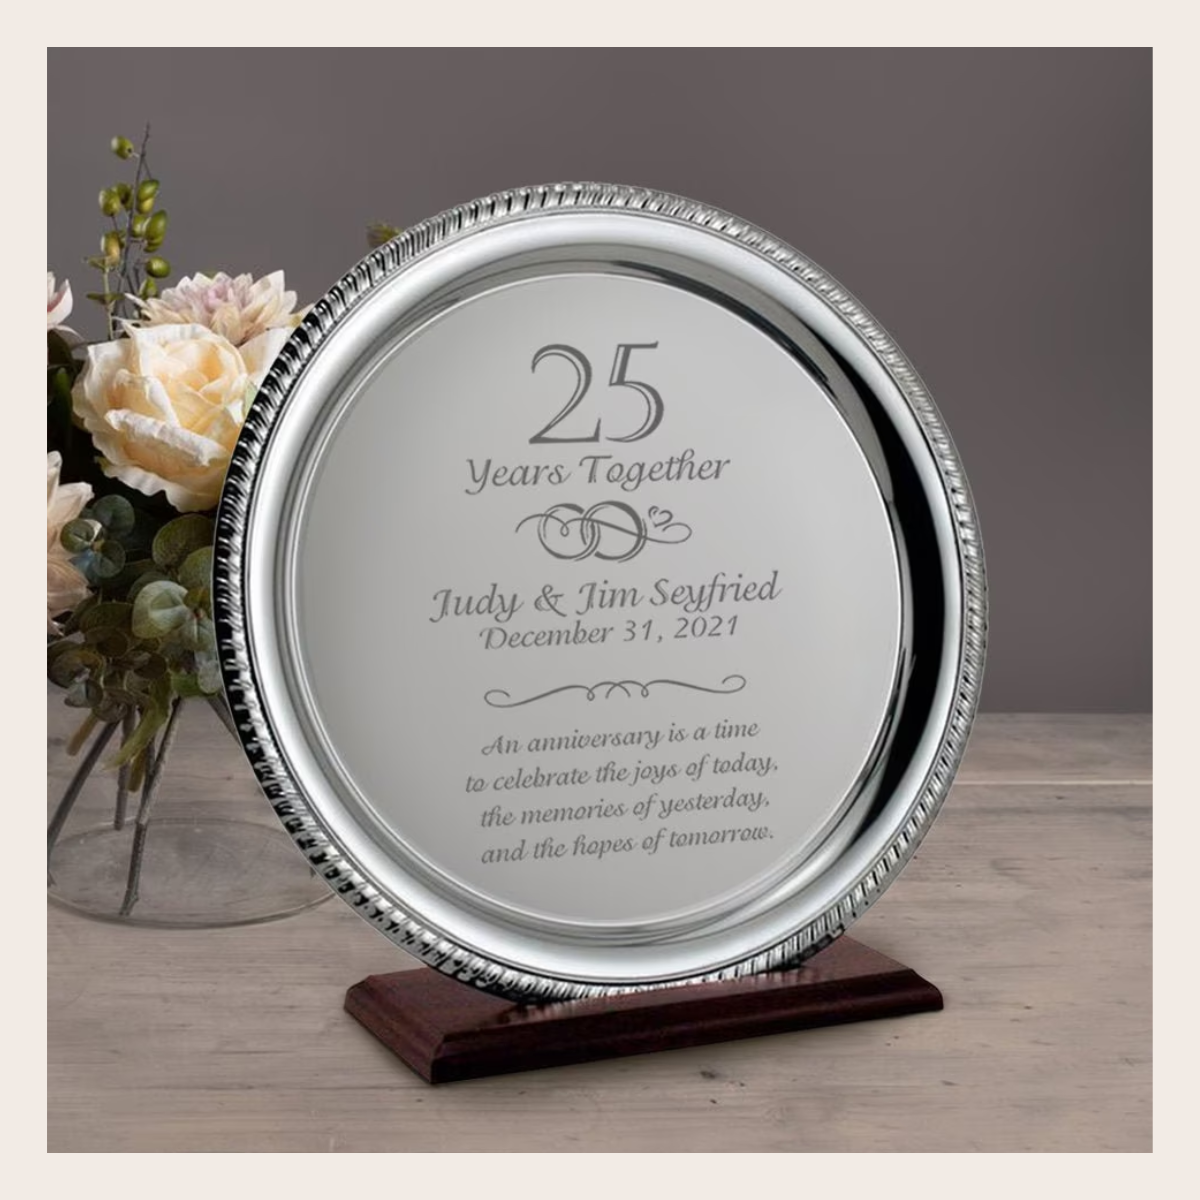 Personalized 25th Wedding Anniversary Gifts, Photo Frames & More